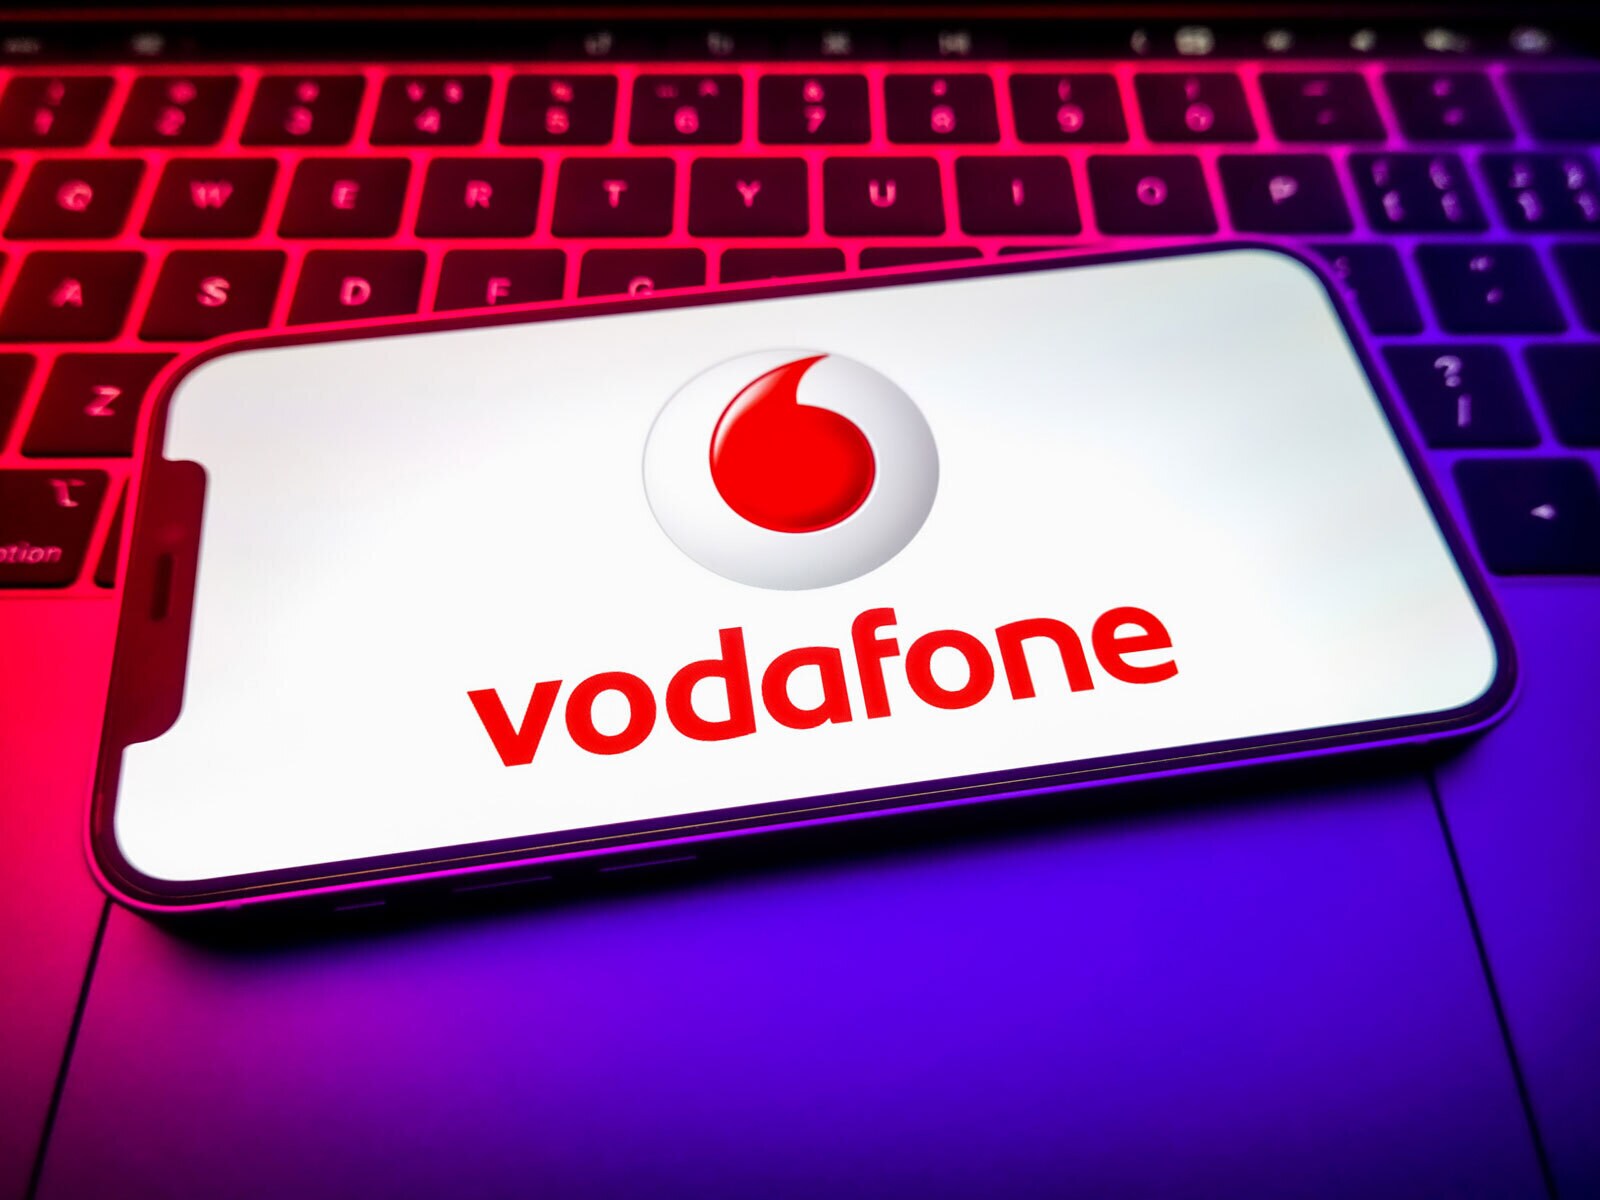 The Vodafone 'quotation mark' logo appears on a smartphone screen in front of a laptop keyboard.